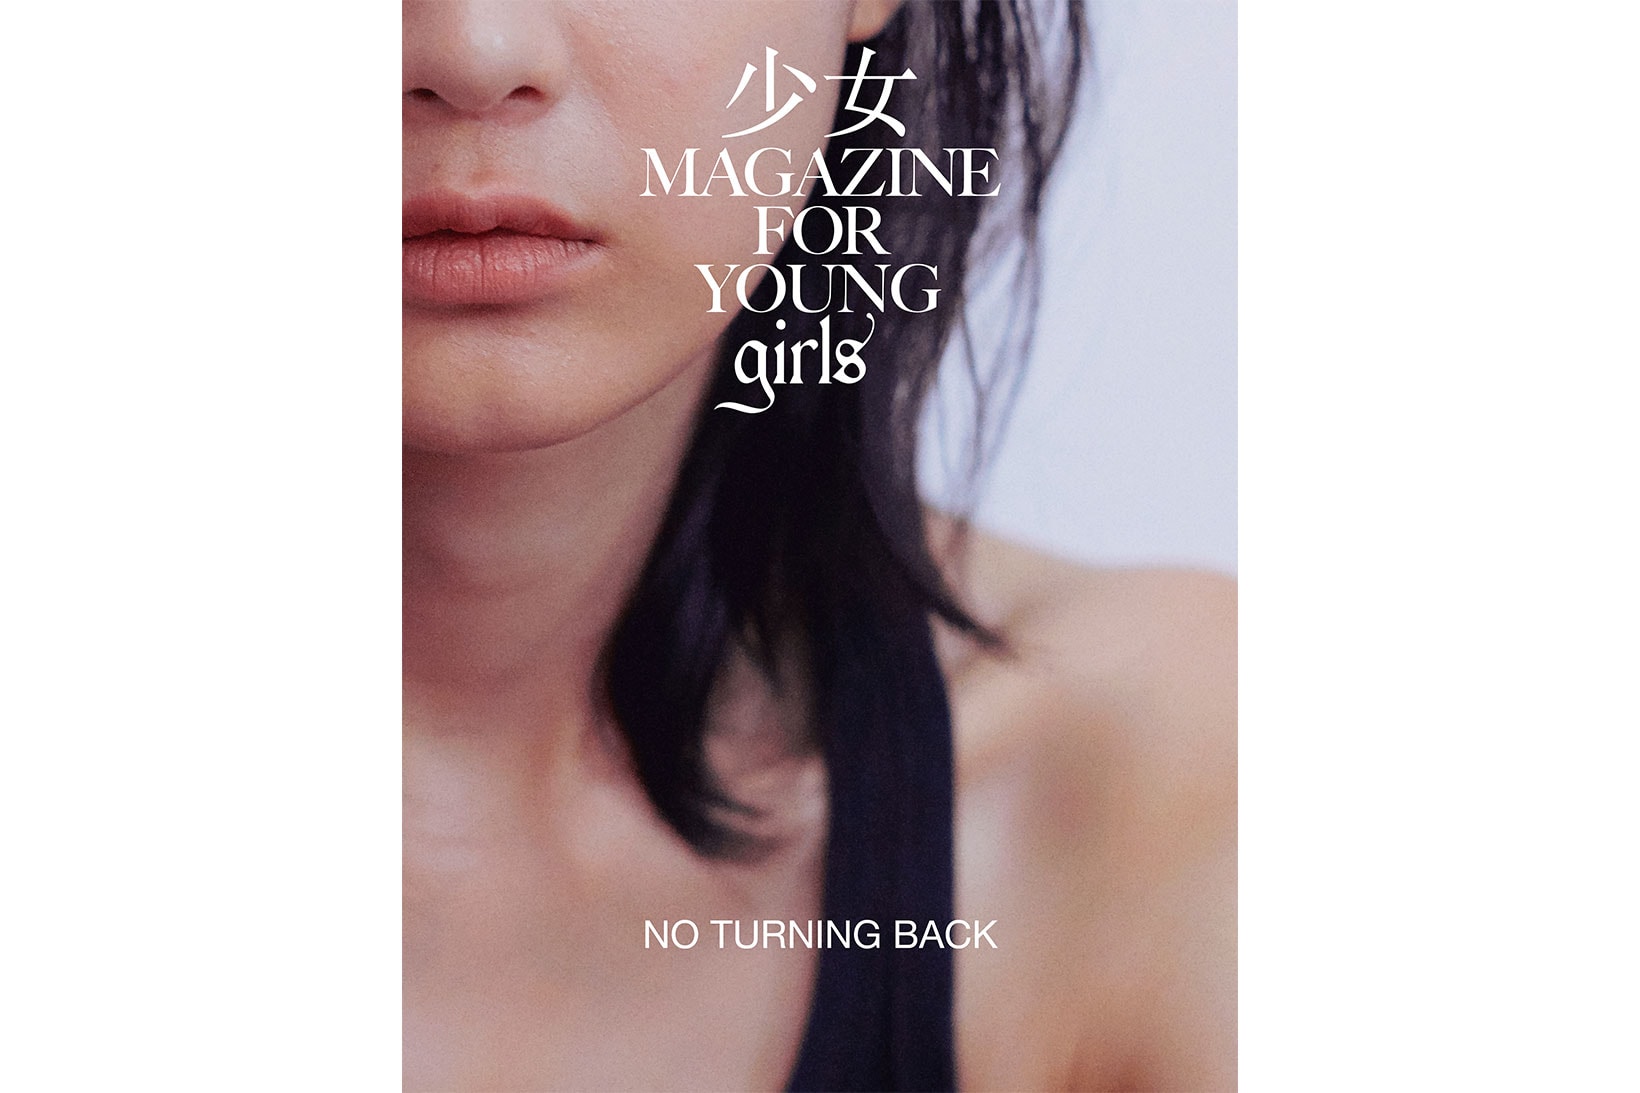 magazine for young girls mfyg independent launch first issue kickstarter campaign stylist designer eom jisoo wei ting wong